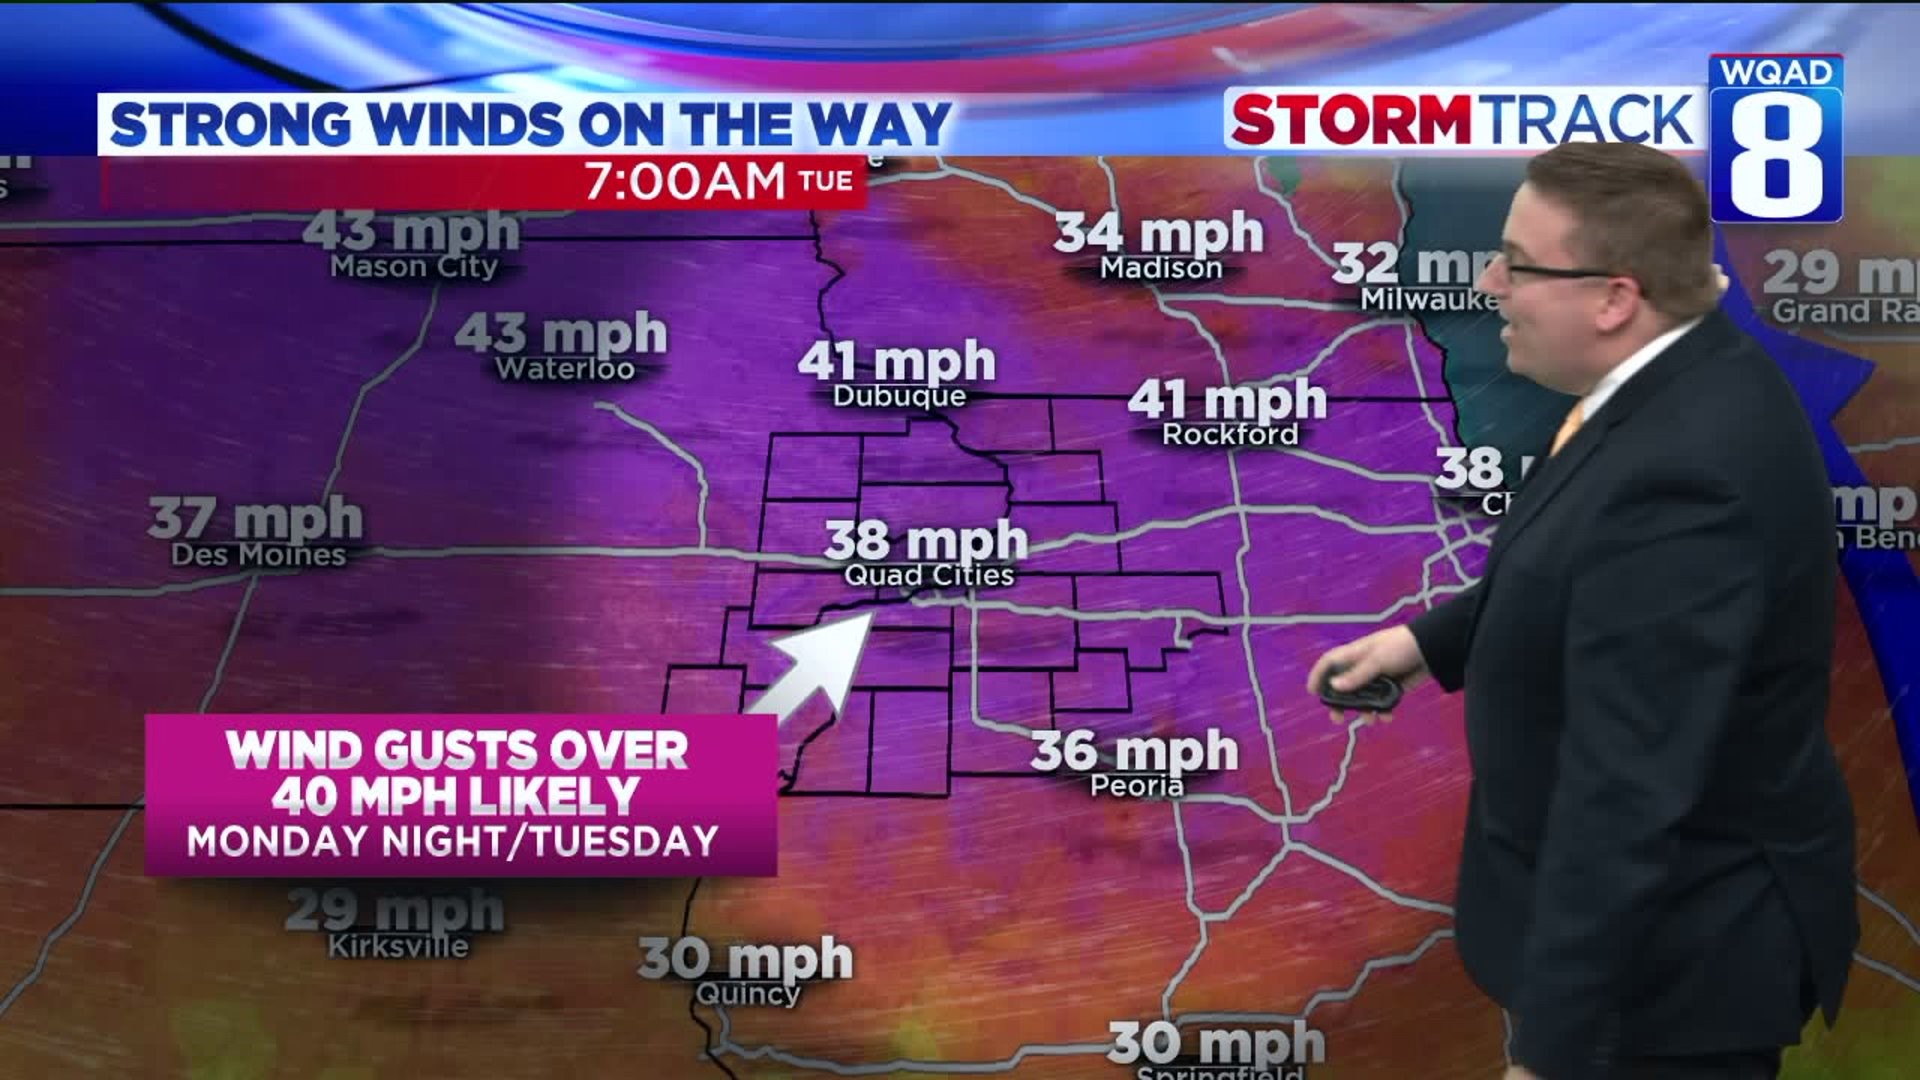 Tracking storms and strong winds for Monday